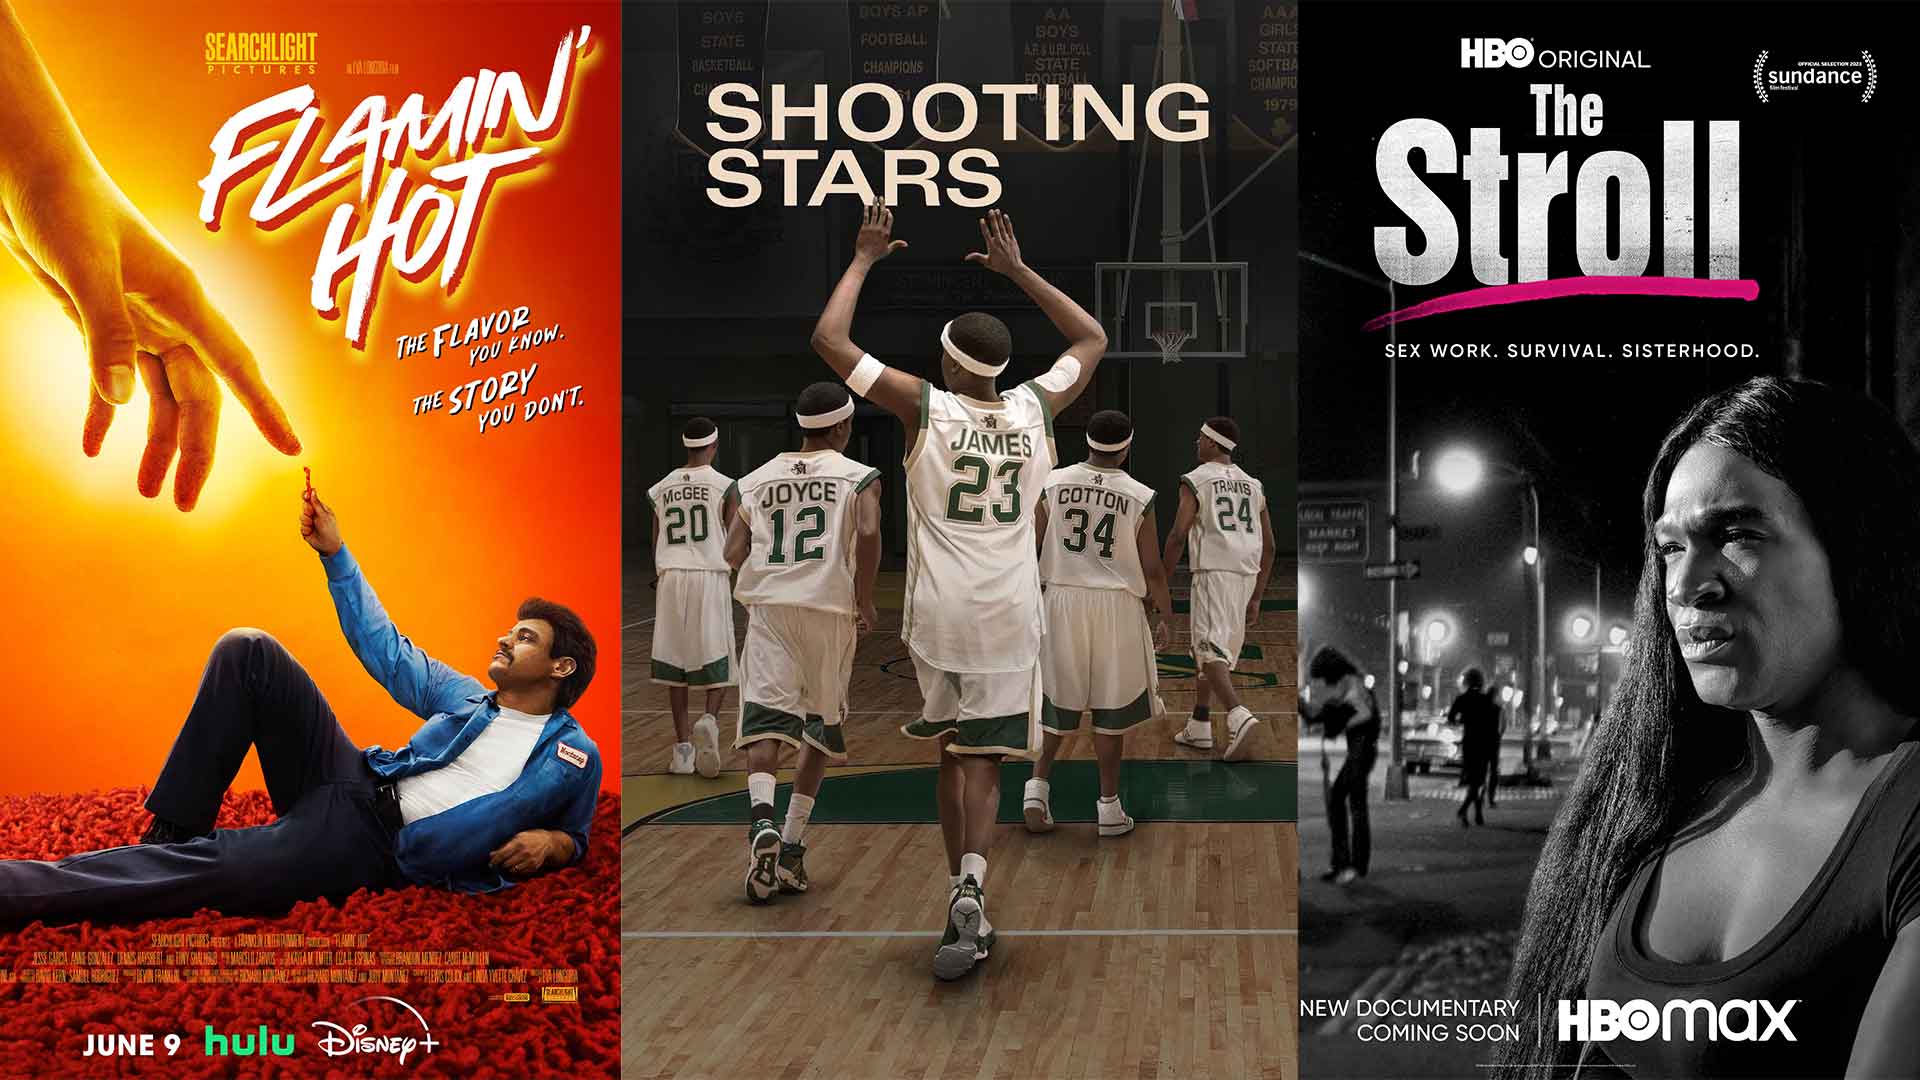 Images of three of the films/tv shows selected for "What to Watch June 2023 AFI Alumni Projects" - Flamin' Hot, Shooting Stars, The Stroll